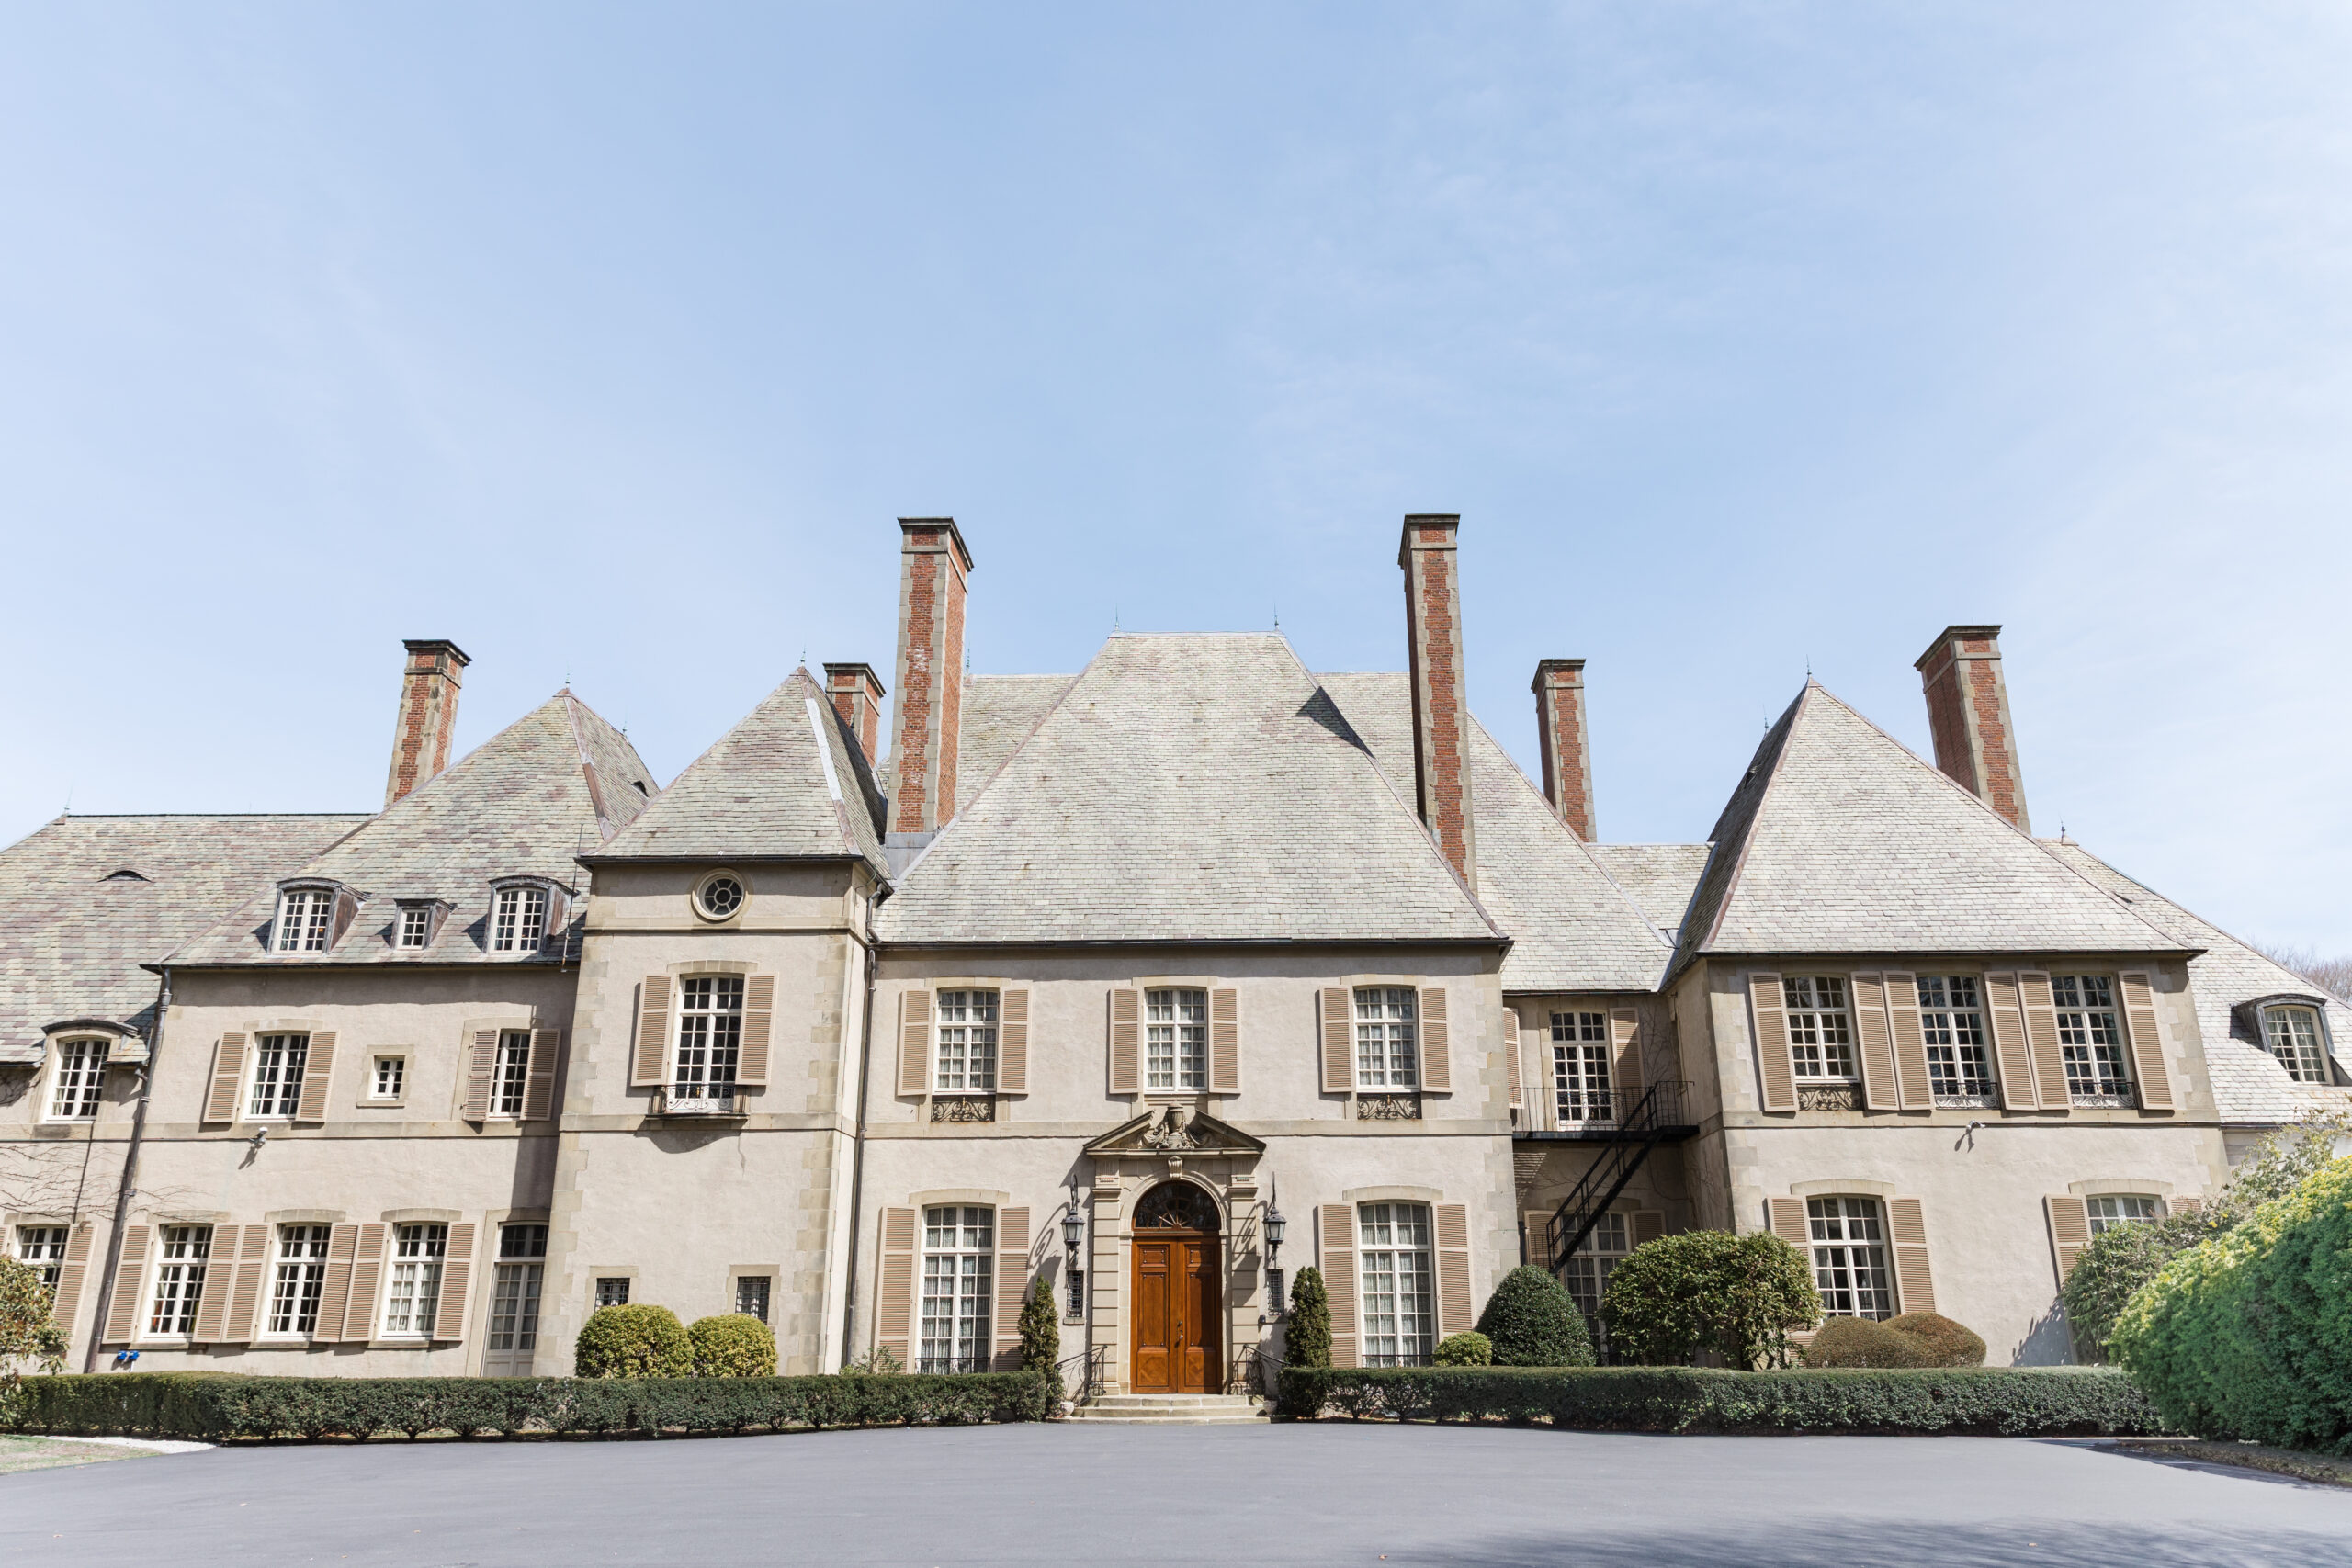 Glen Manor House is a historical mansion that serves as a wedding venue to couples in Rhode Island who are seeking a romantic setting for their wedding.